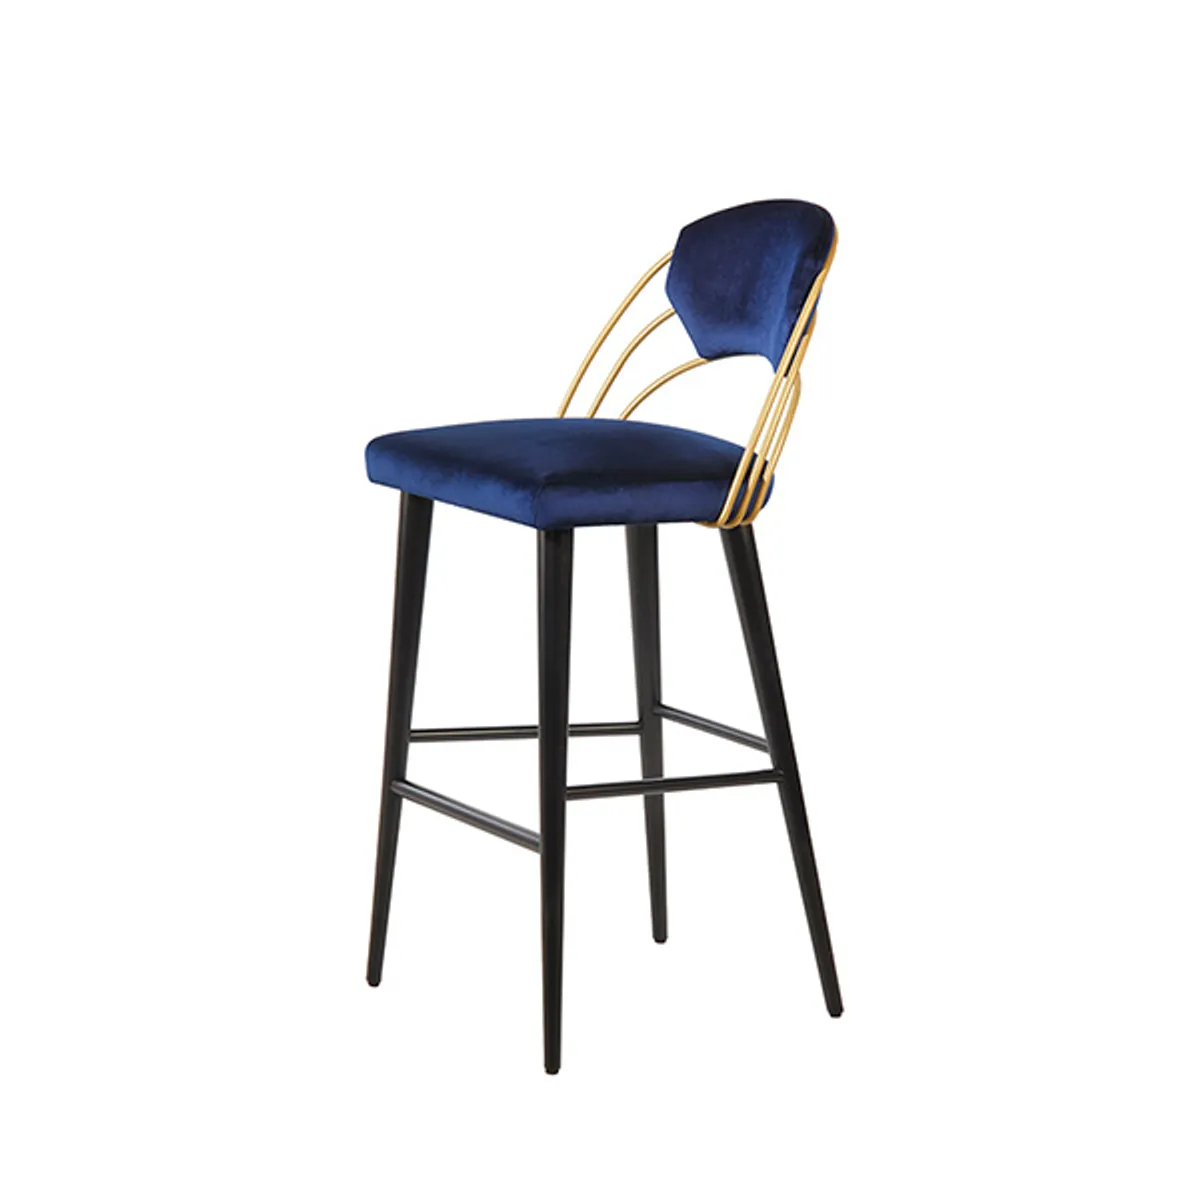 Empire Bar Stool For Design Led Bars And Restaurants By Insideoutcontracts